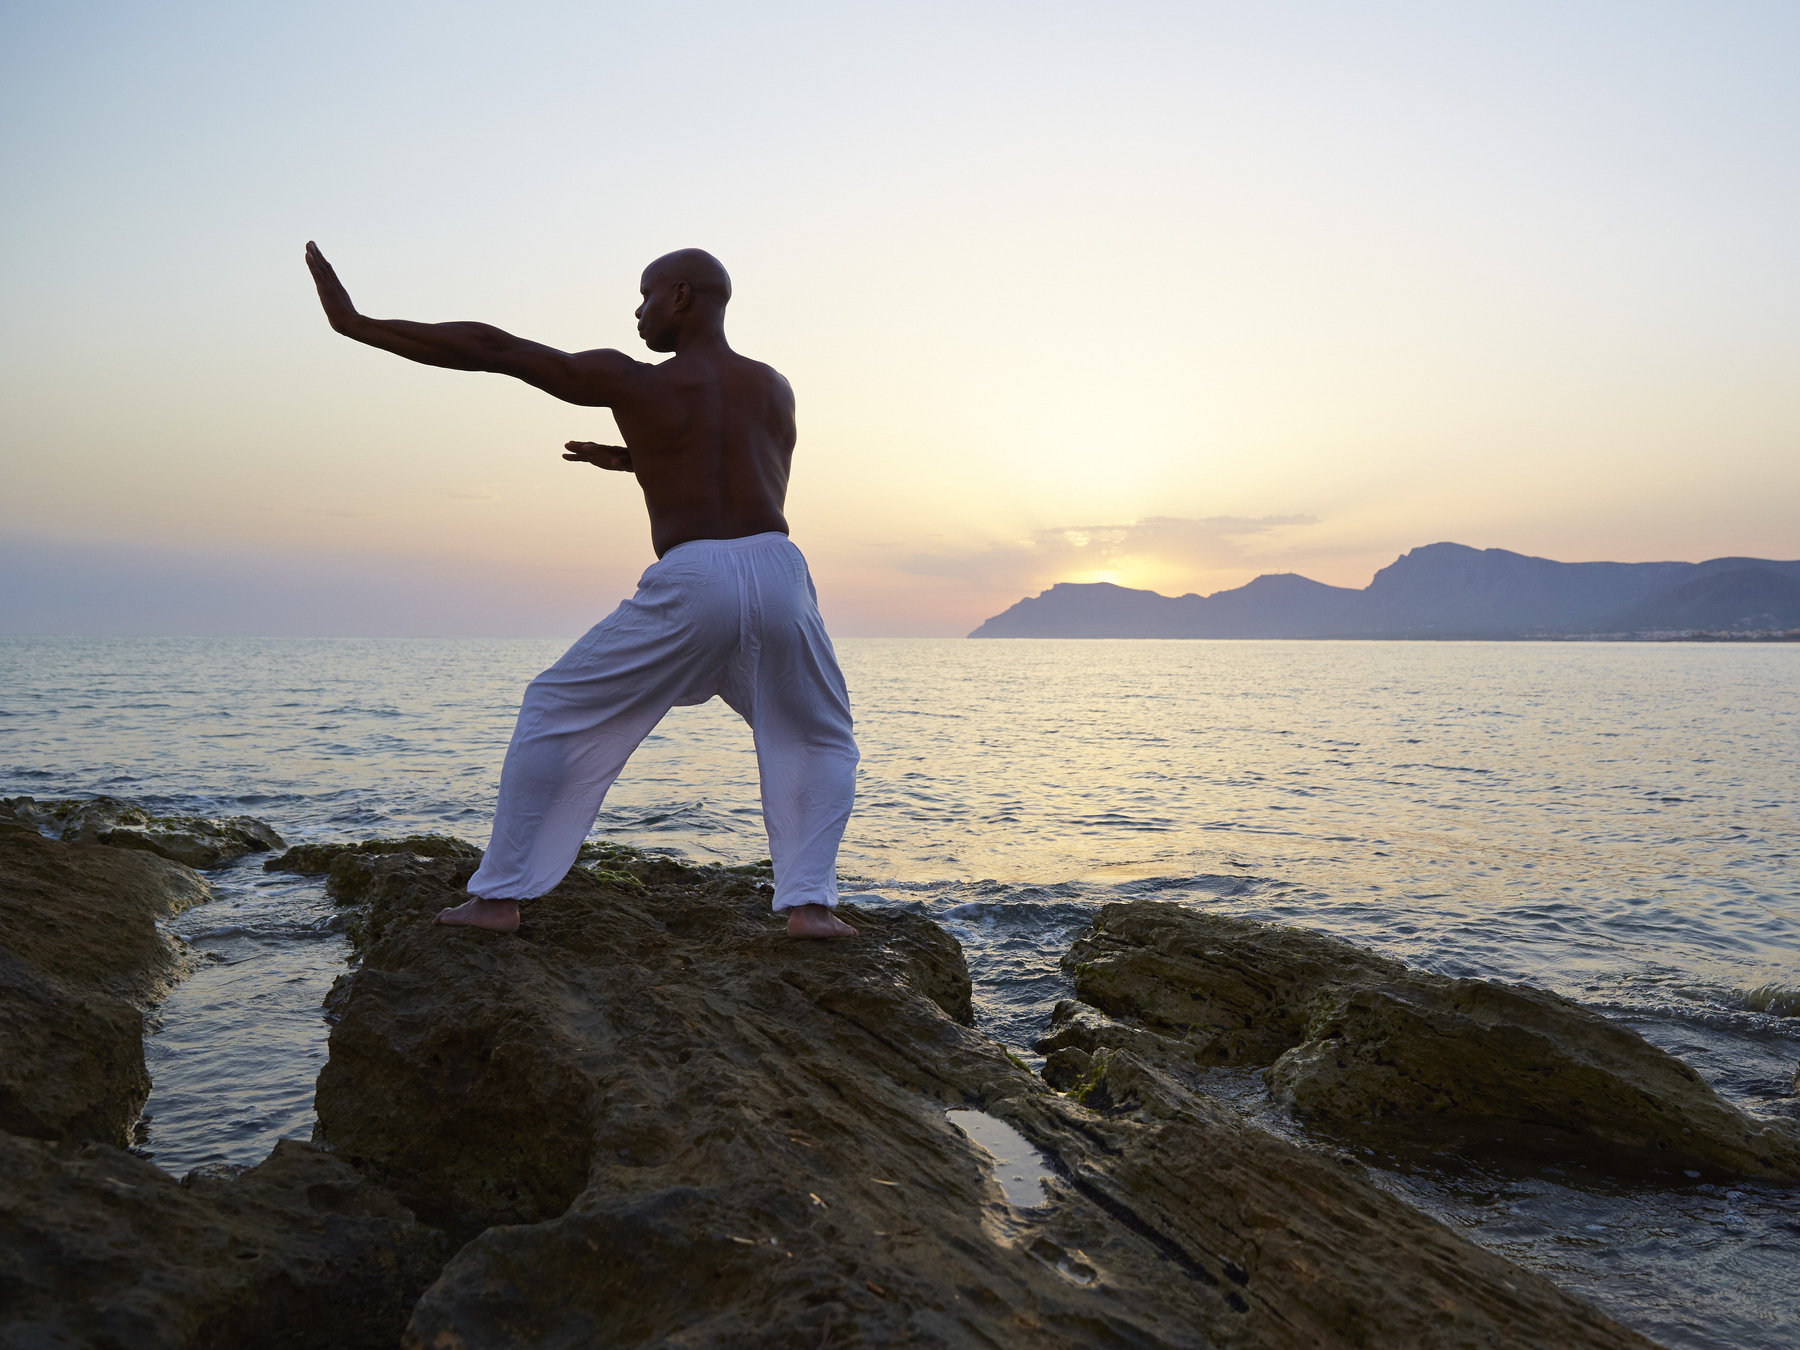 Tai chi reduces blood pressure better than aerobic exercise, study finds